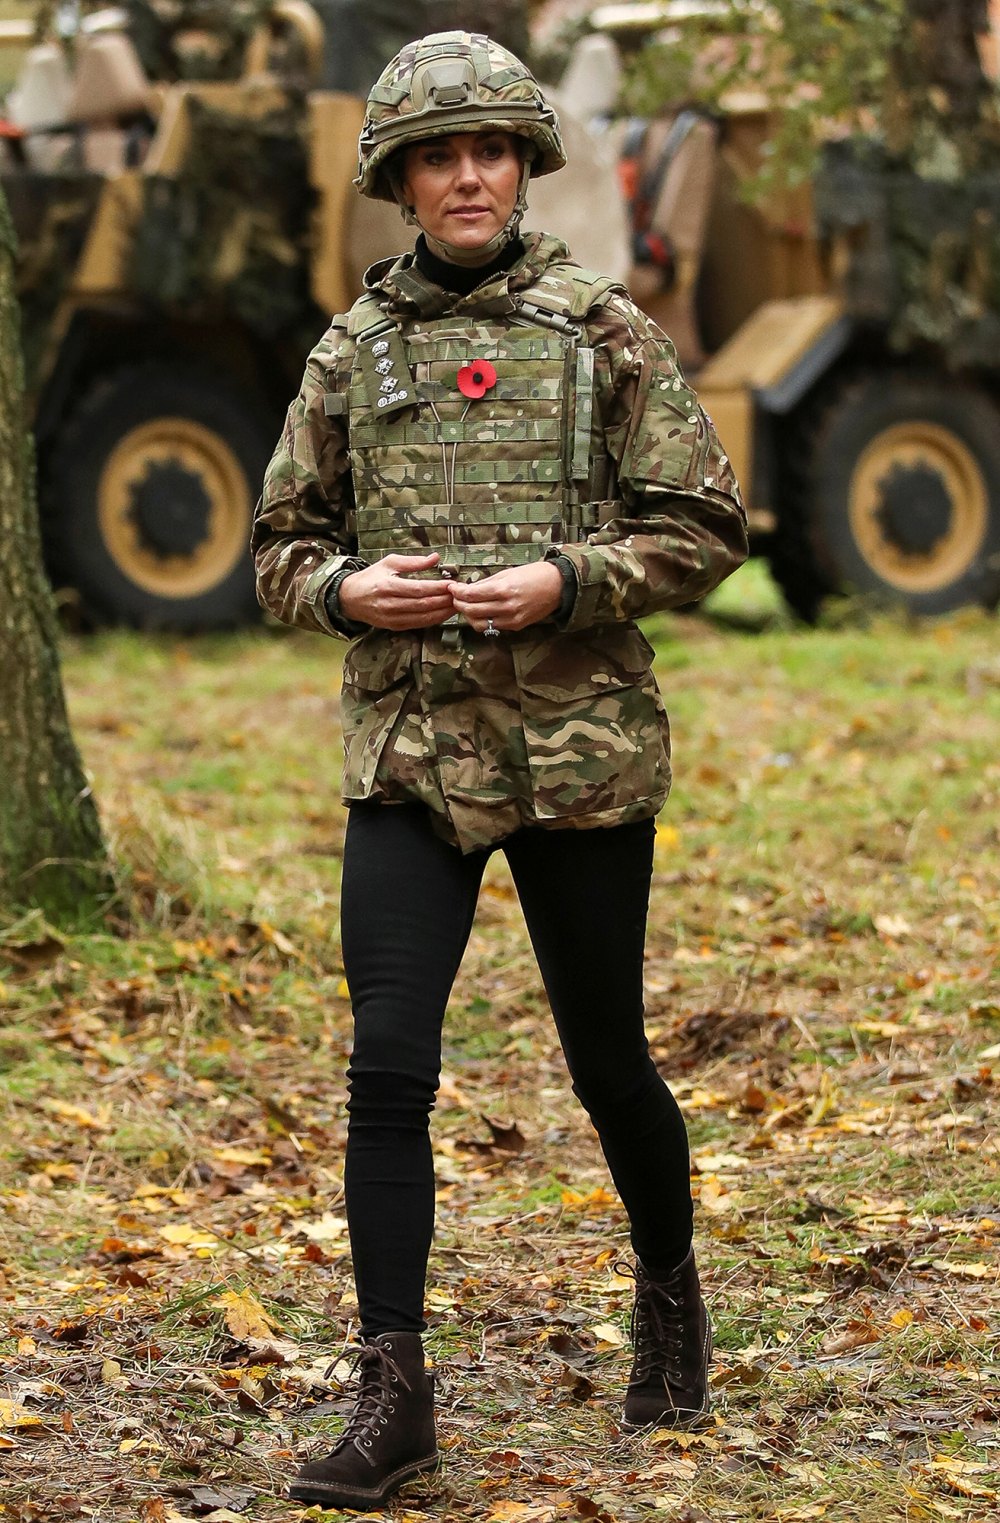 Princess Kate Middleton Trades in Her Dresses for Camo During Military Installation Visit